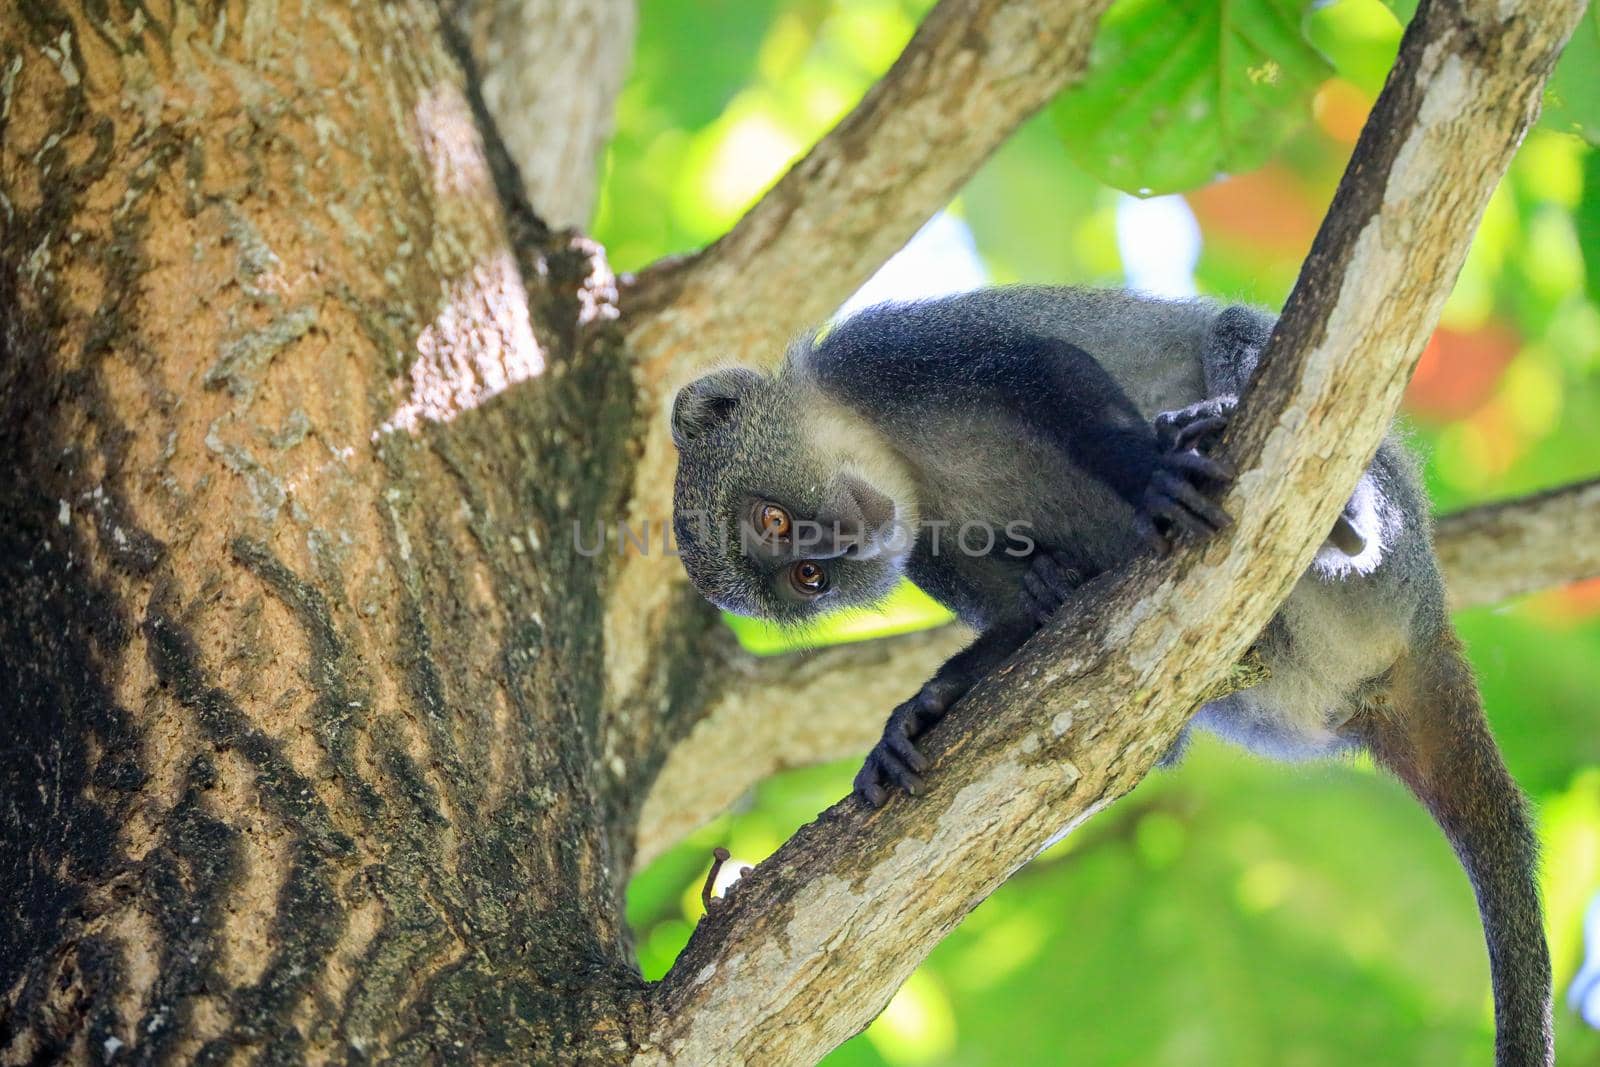 White-throated Monkey in a tee, Kenya, Africa by Weltblick